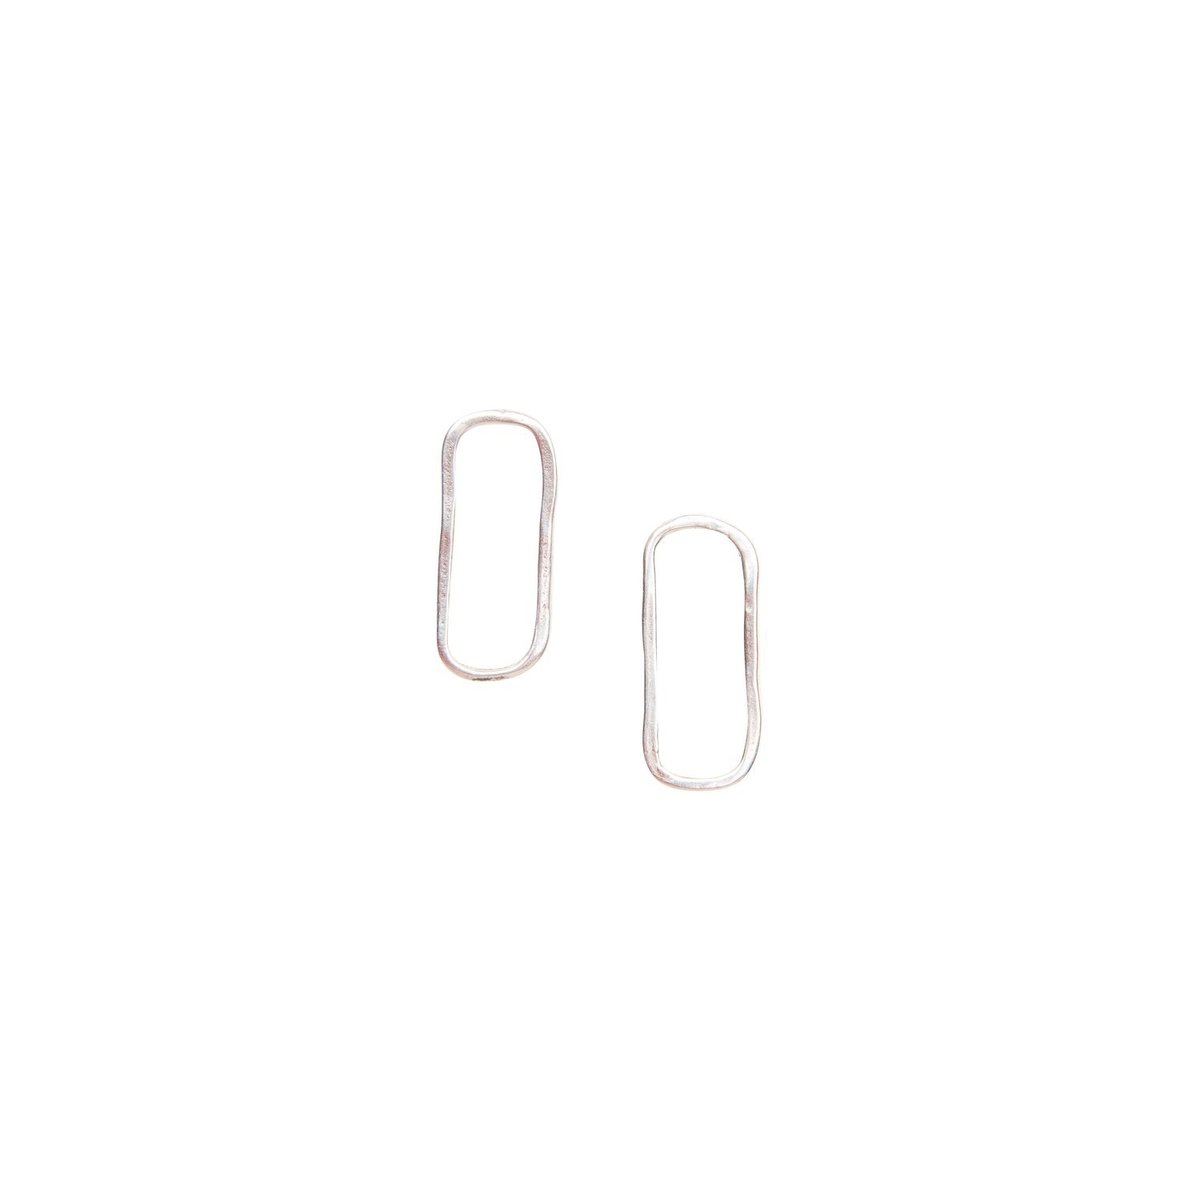 Original Hardware - Earrings - Small Rectangle Posts - SS